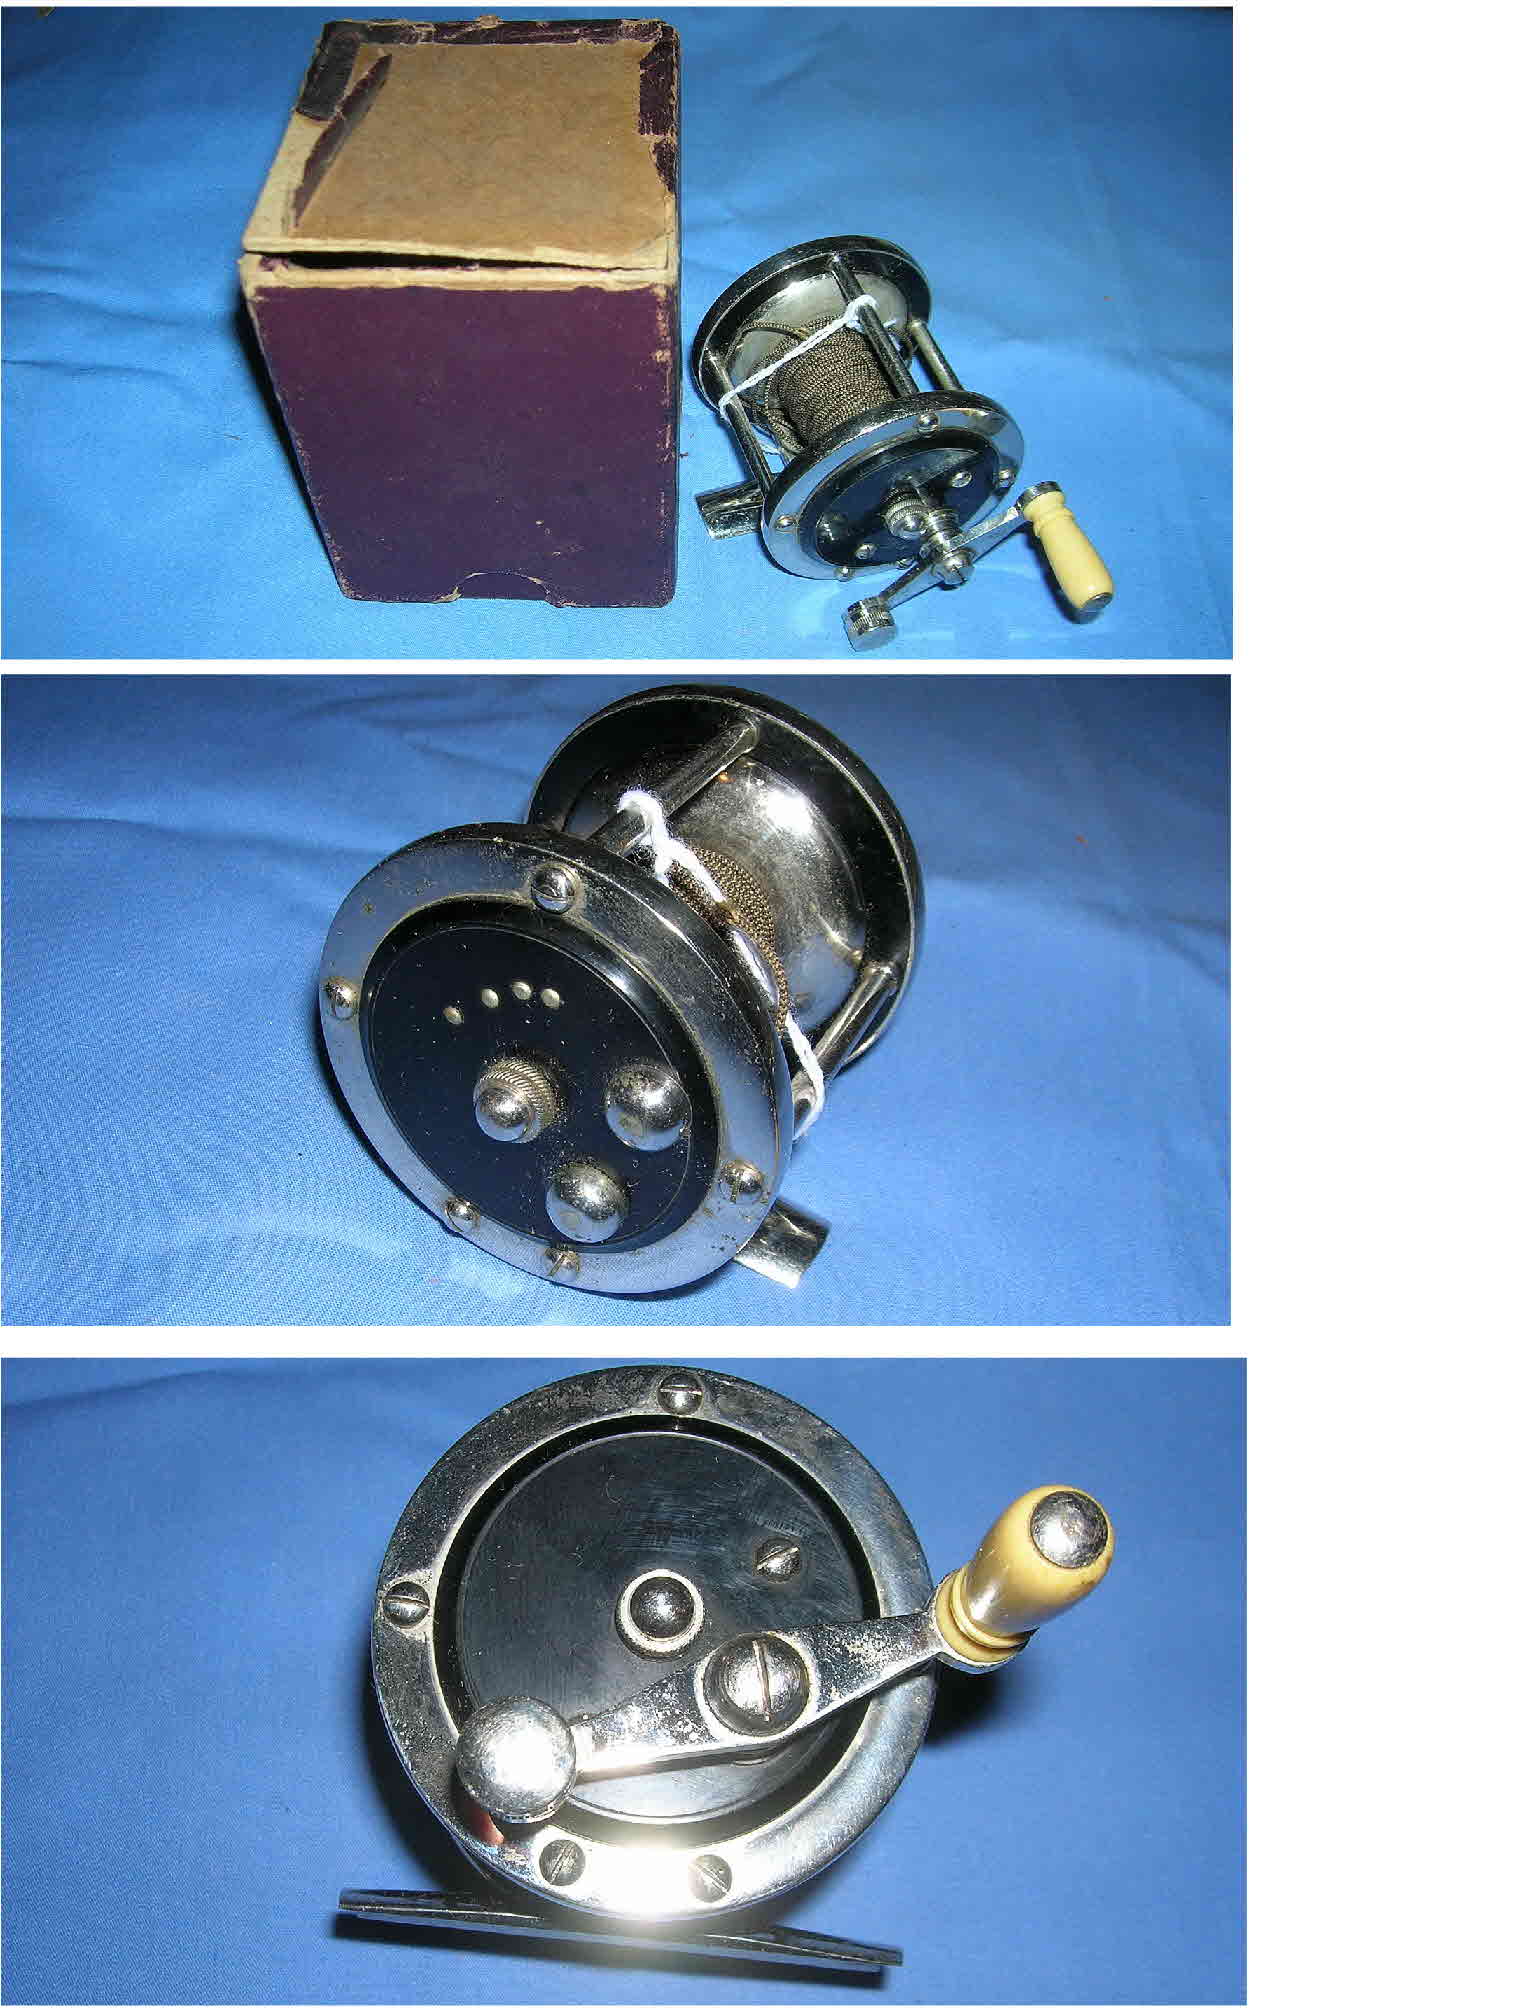 Abercrombie & Fitch Bait Casting c1940s Fishing Reel